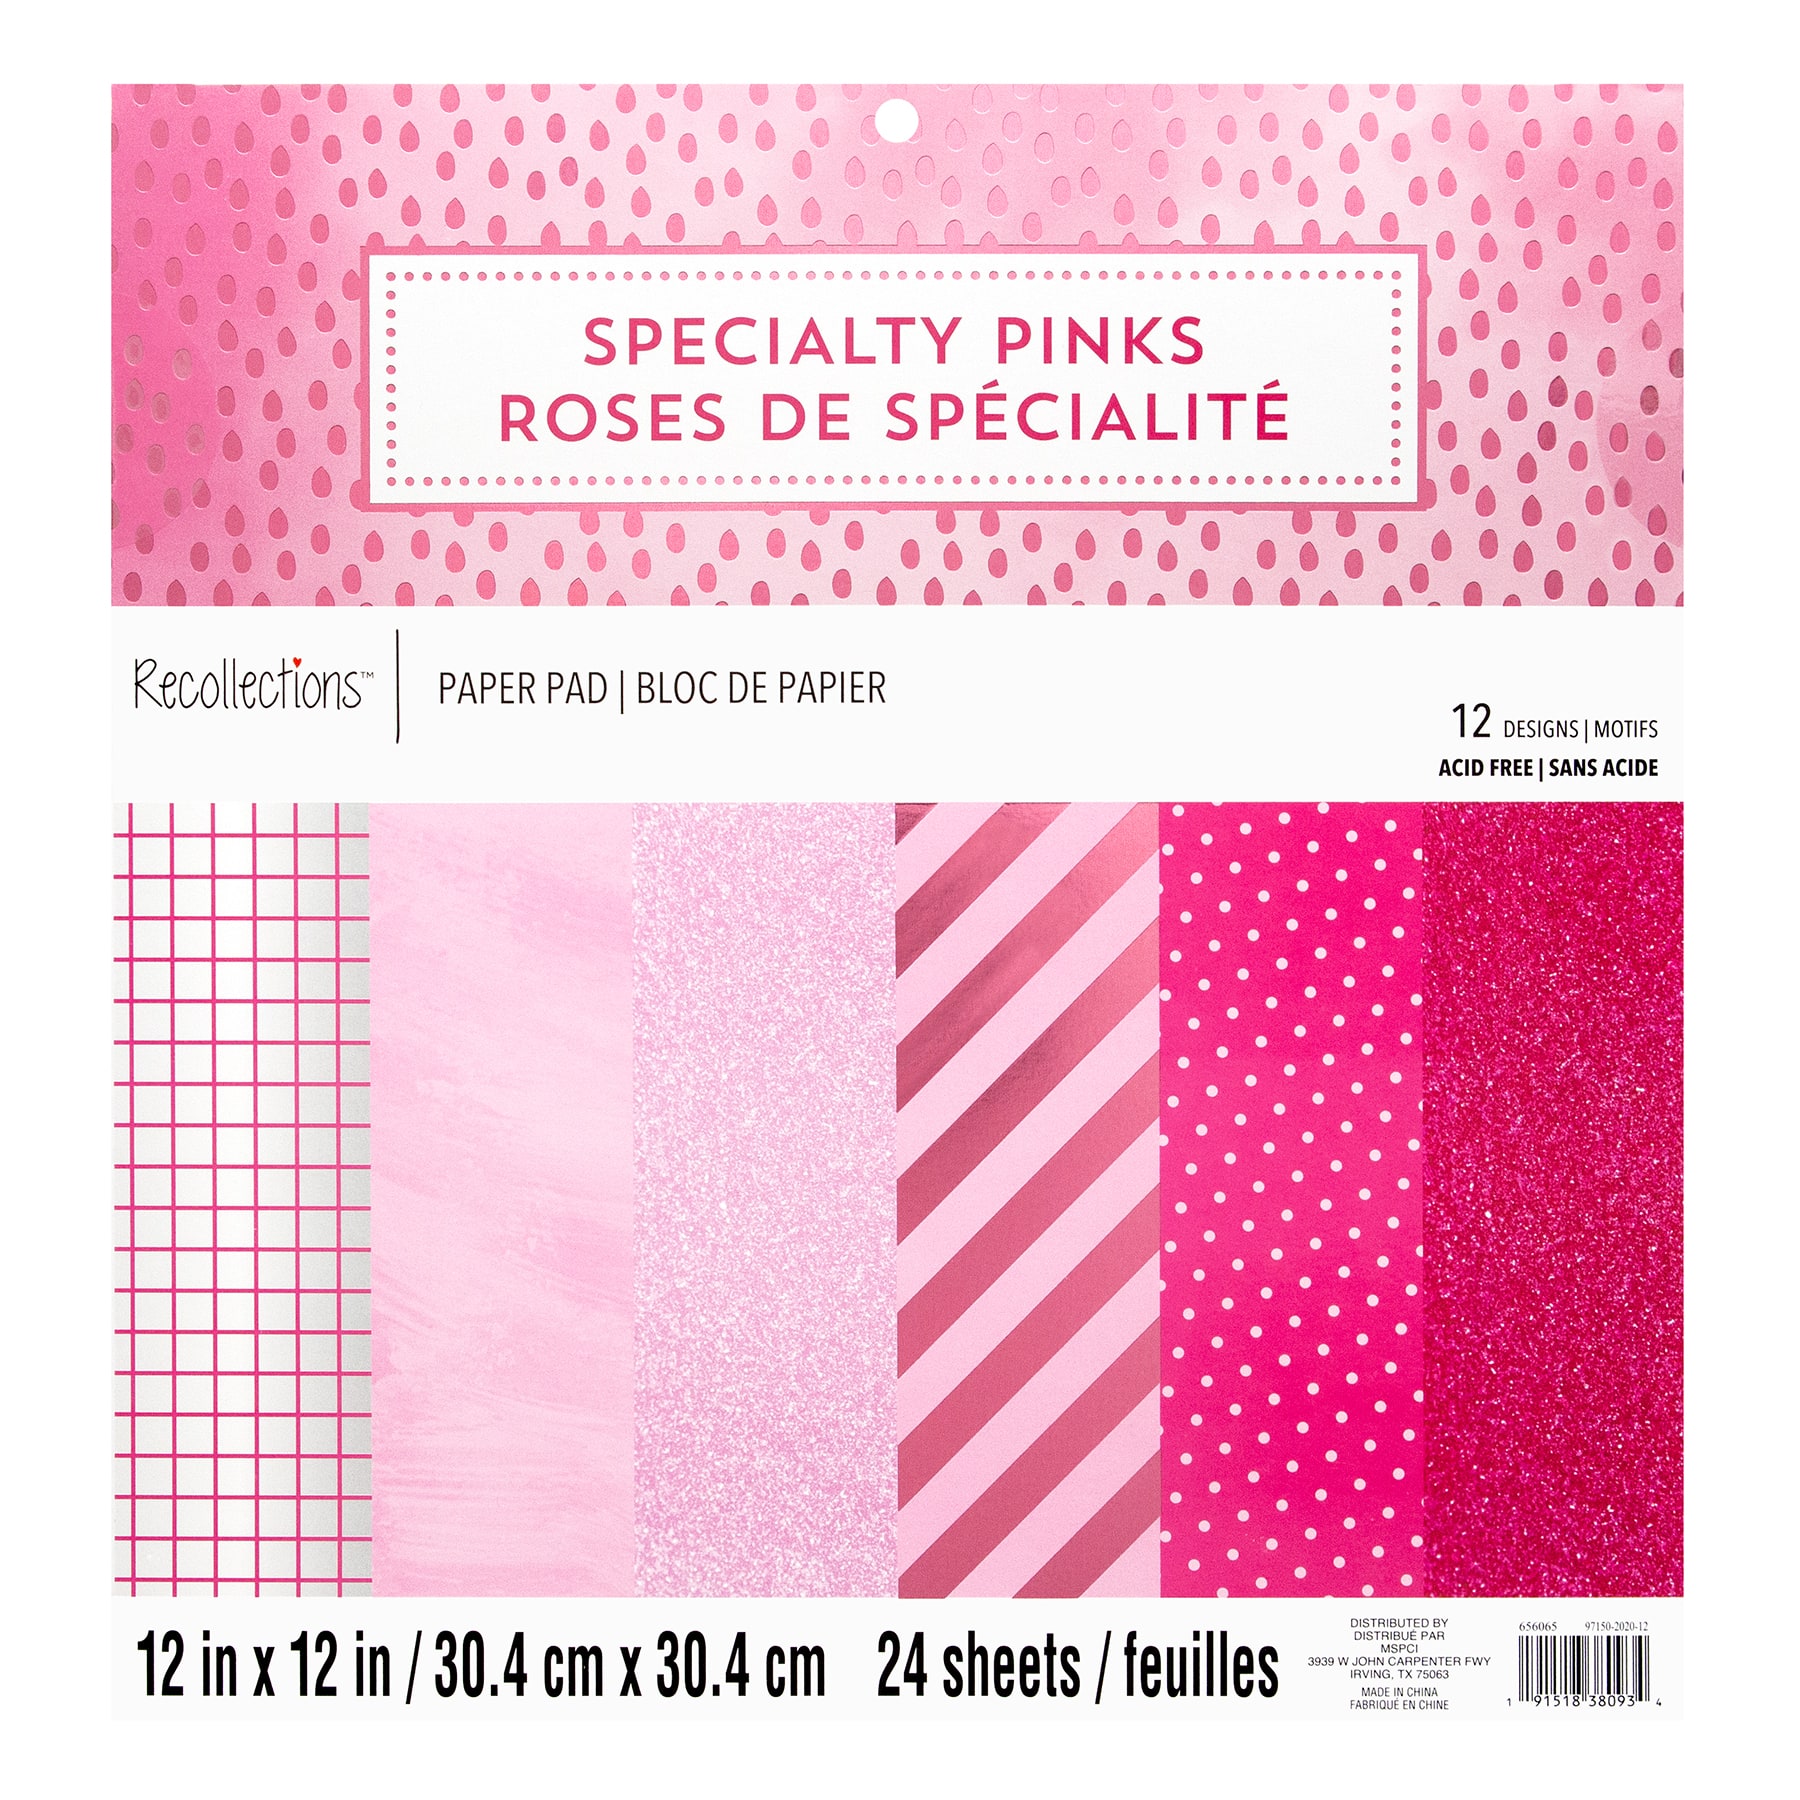 Basics Paper Pad by Recollections™, 12 x 12